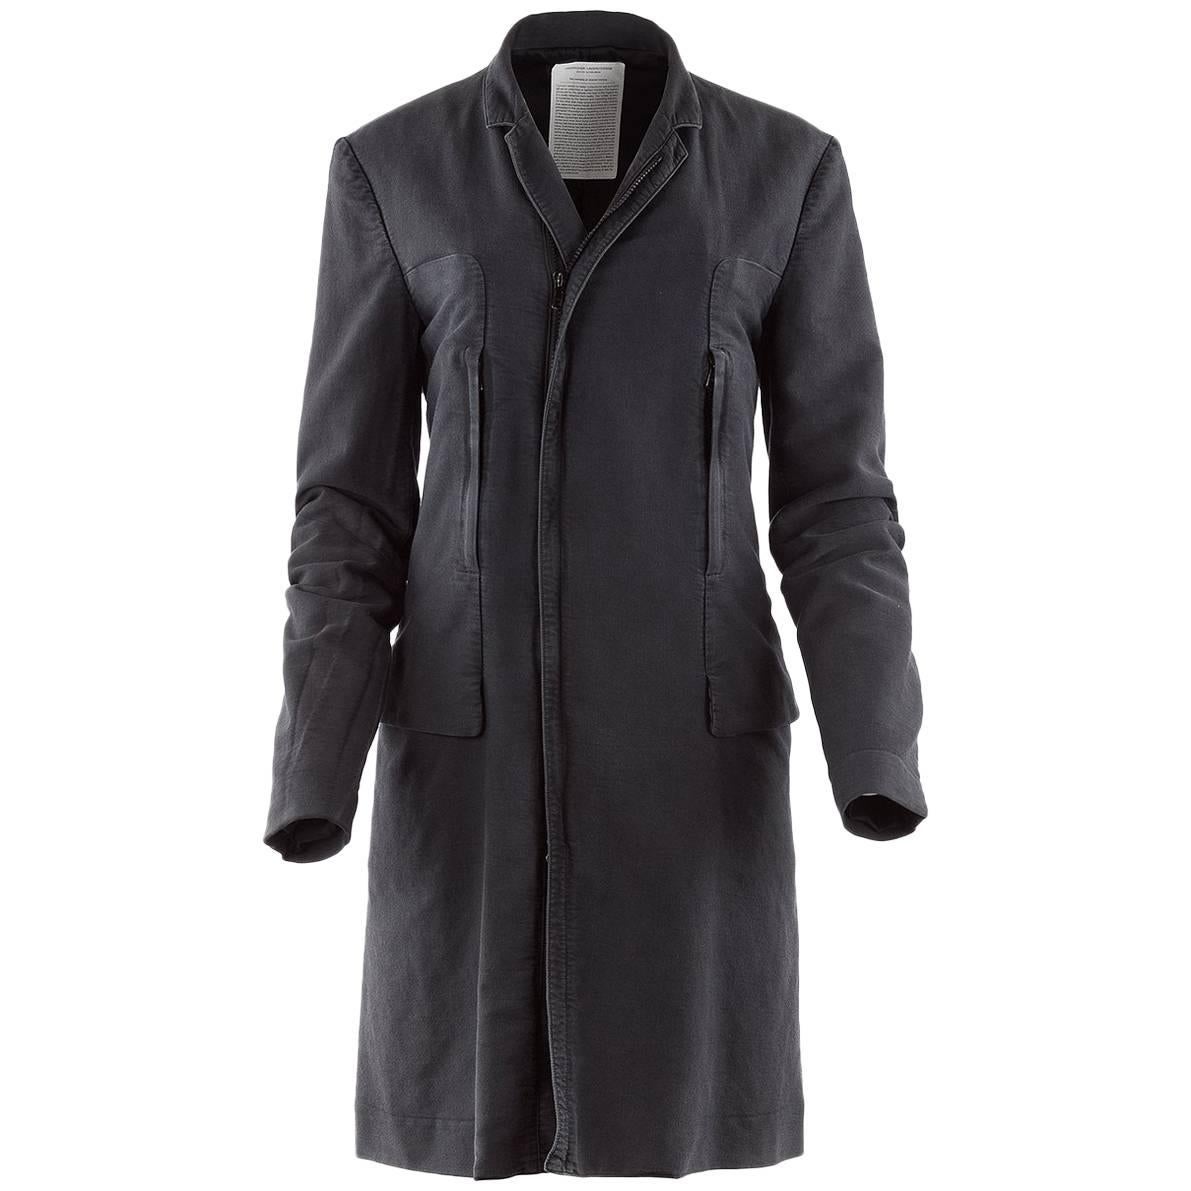 Undercover Clothing Charcoal Cotton Zip Pocket Car Coat For Sale